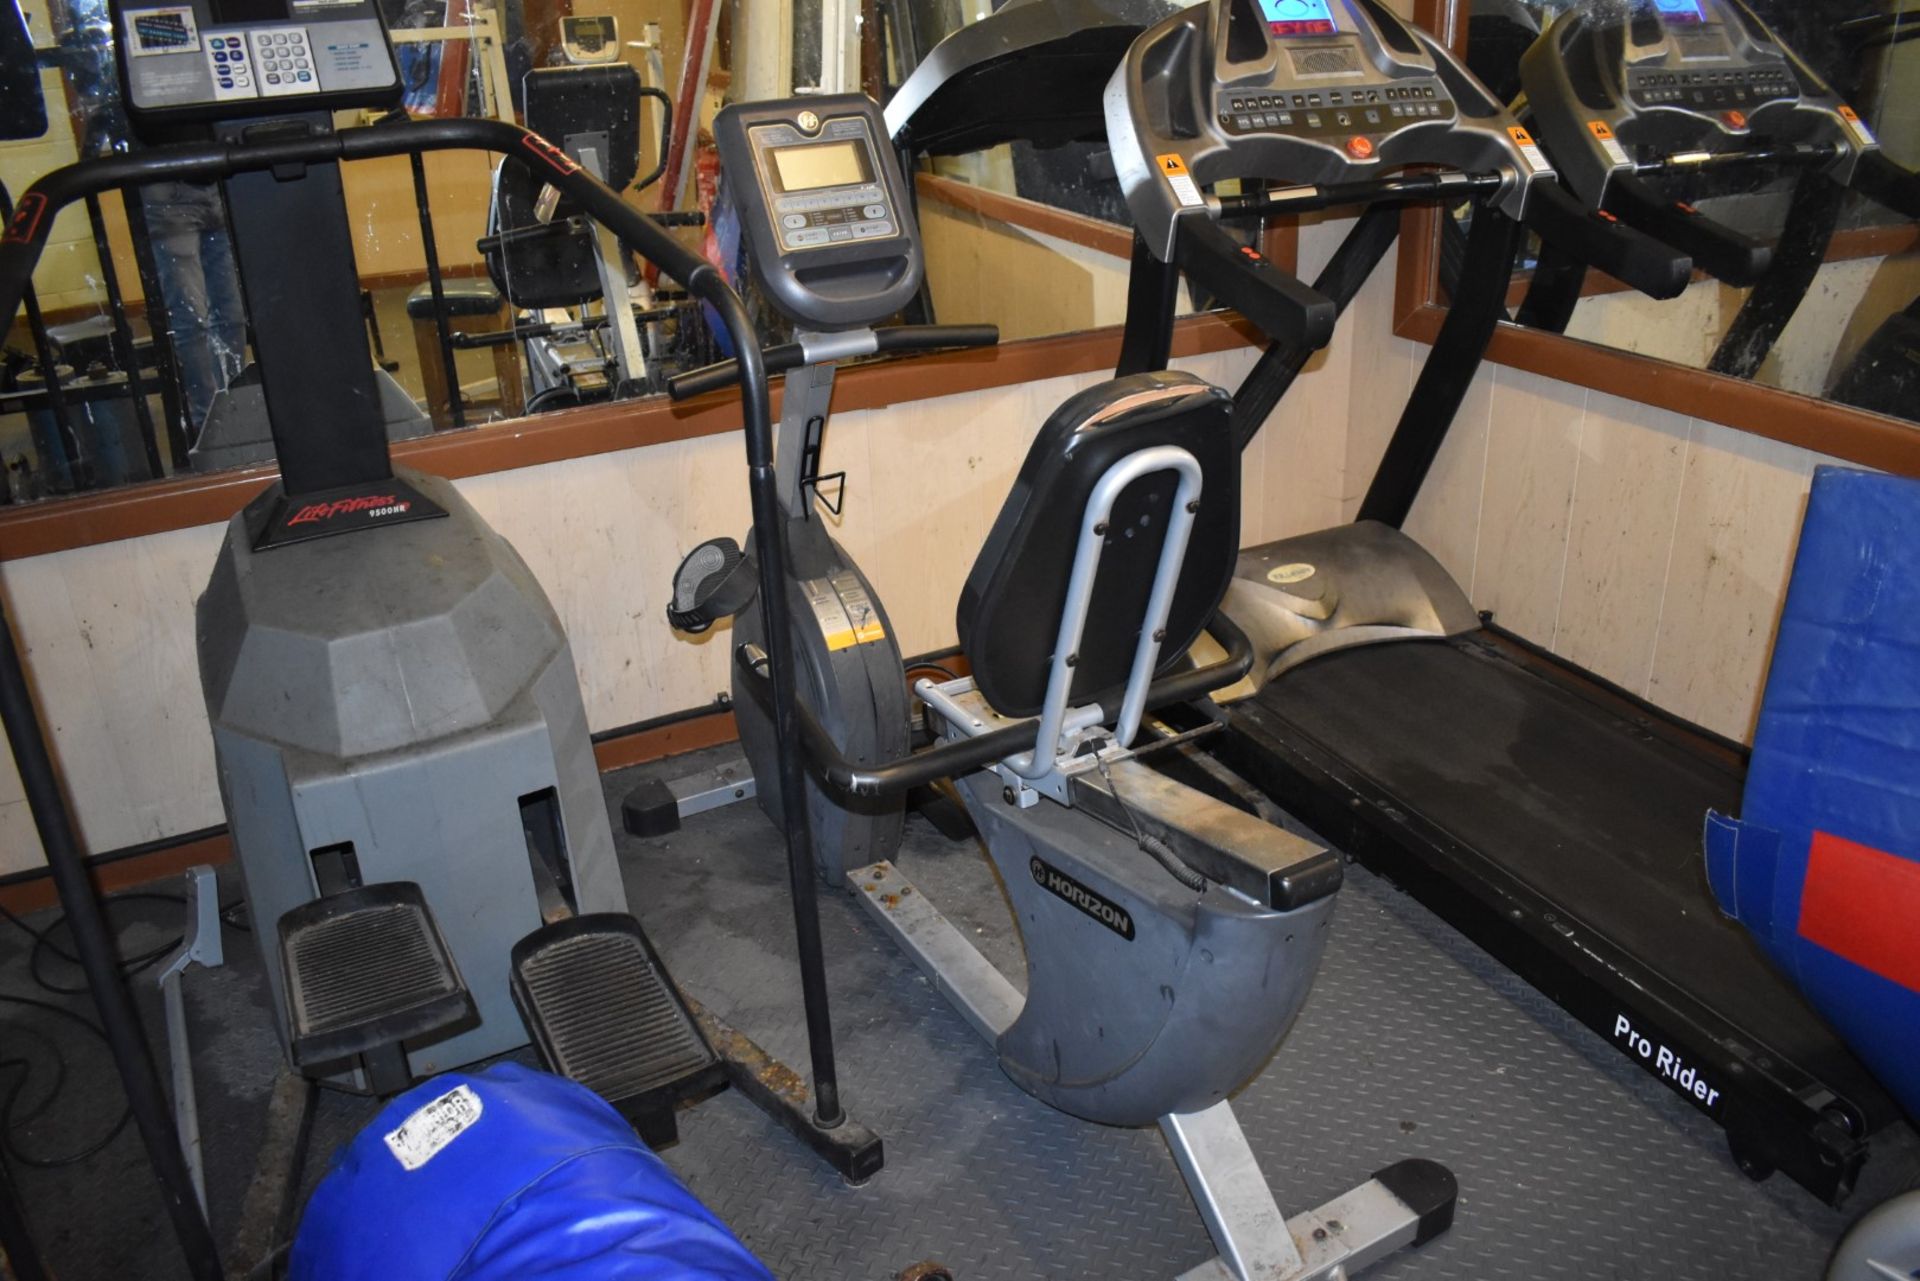 Contents of Bodybuilding and Strongman Gym - Includes Approx 30 Pieces of Gym Equipment, Floor Mats, - Image 15 of 31